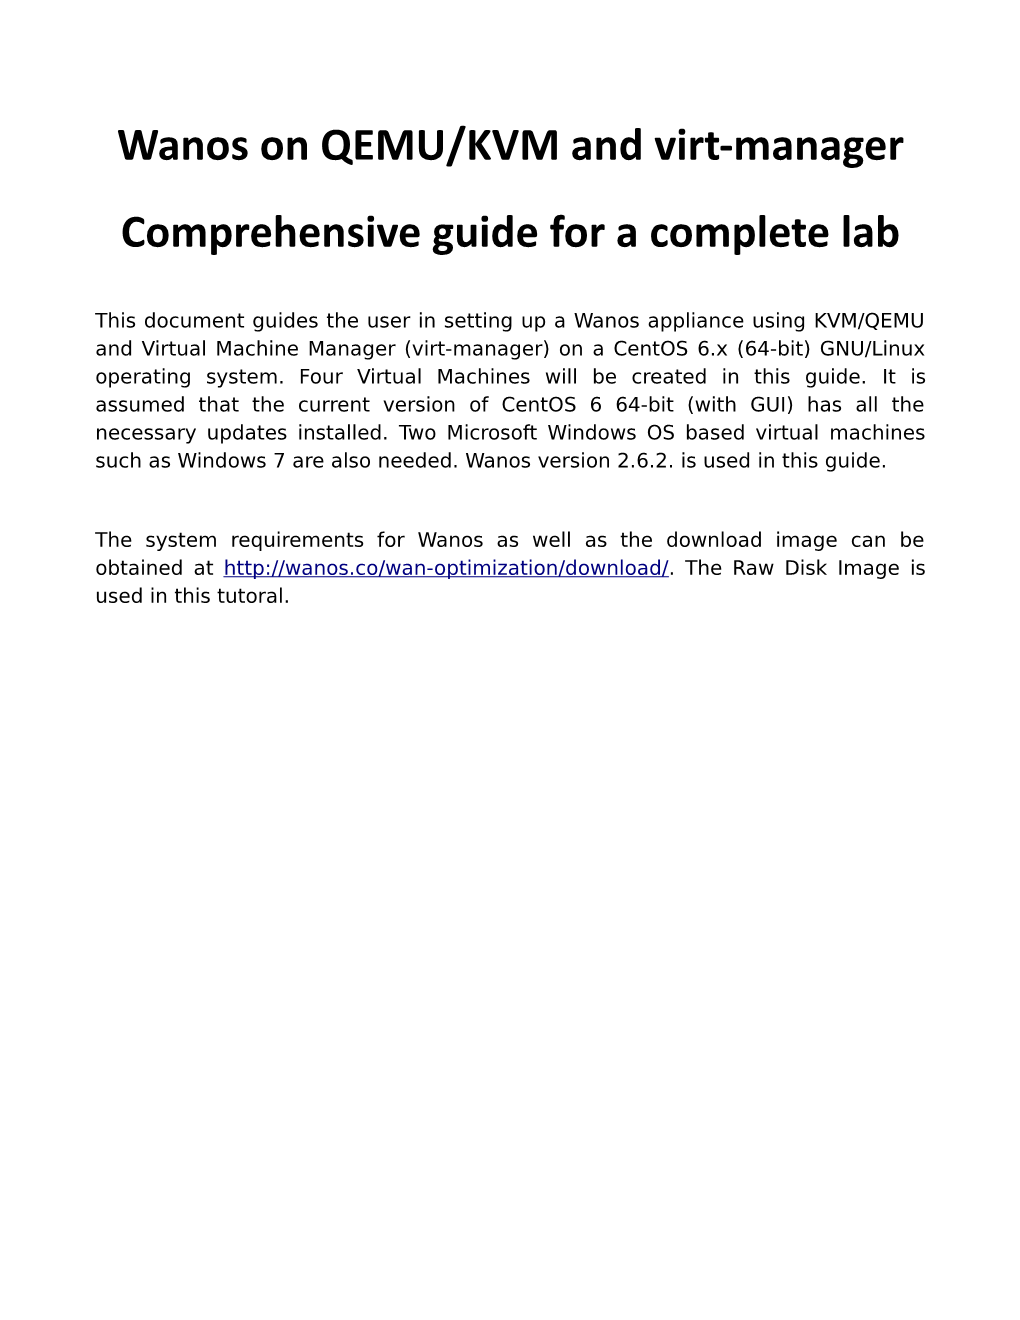 Wanos on QEMU/KVM and Virt-Manager Comprehensive Guide for a Complete Lab